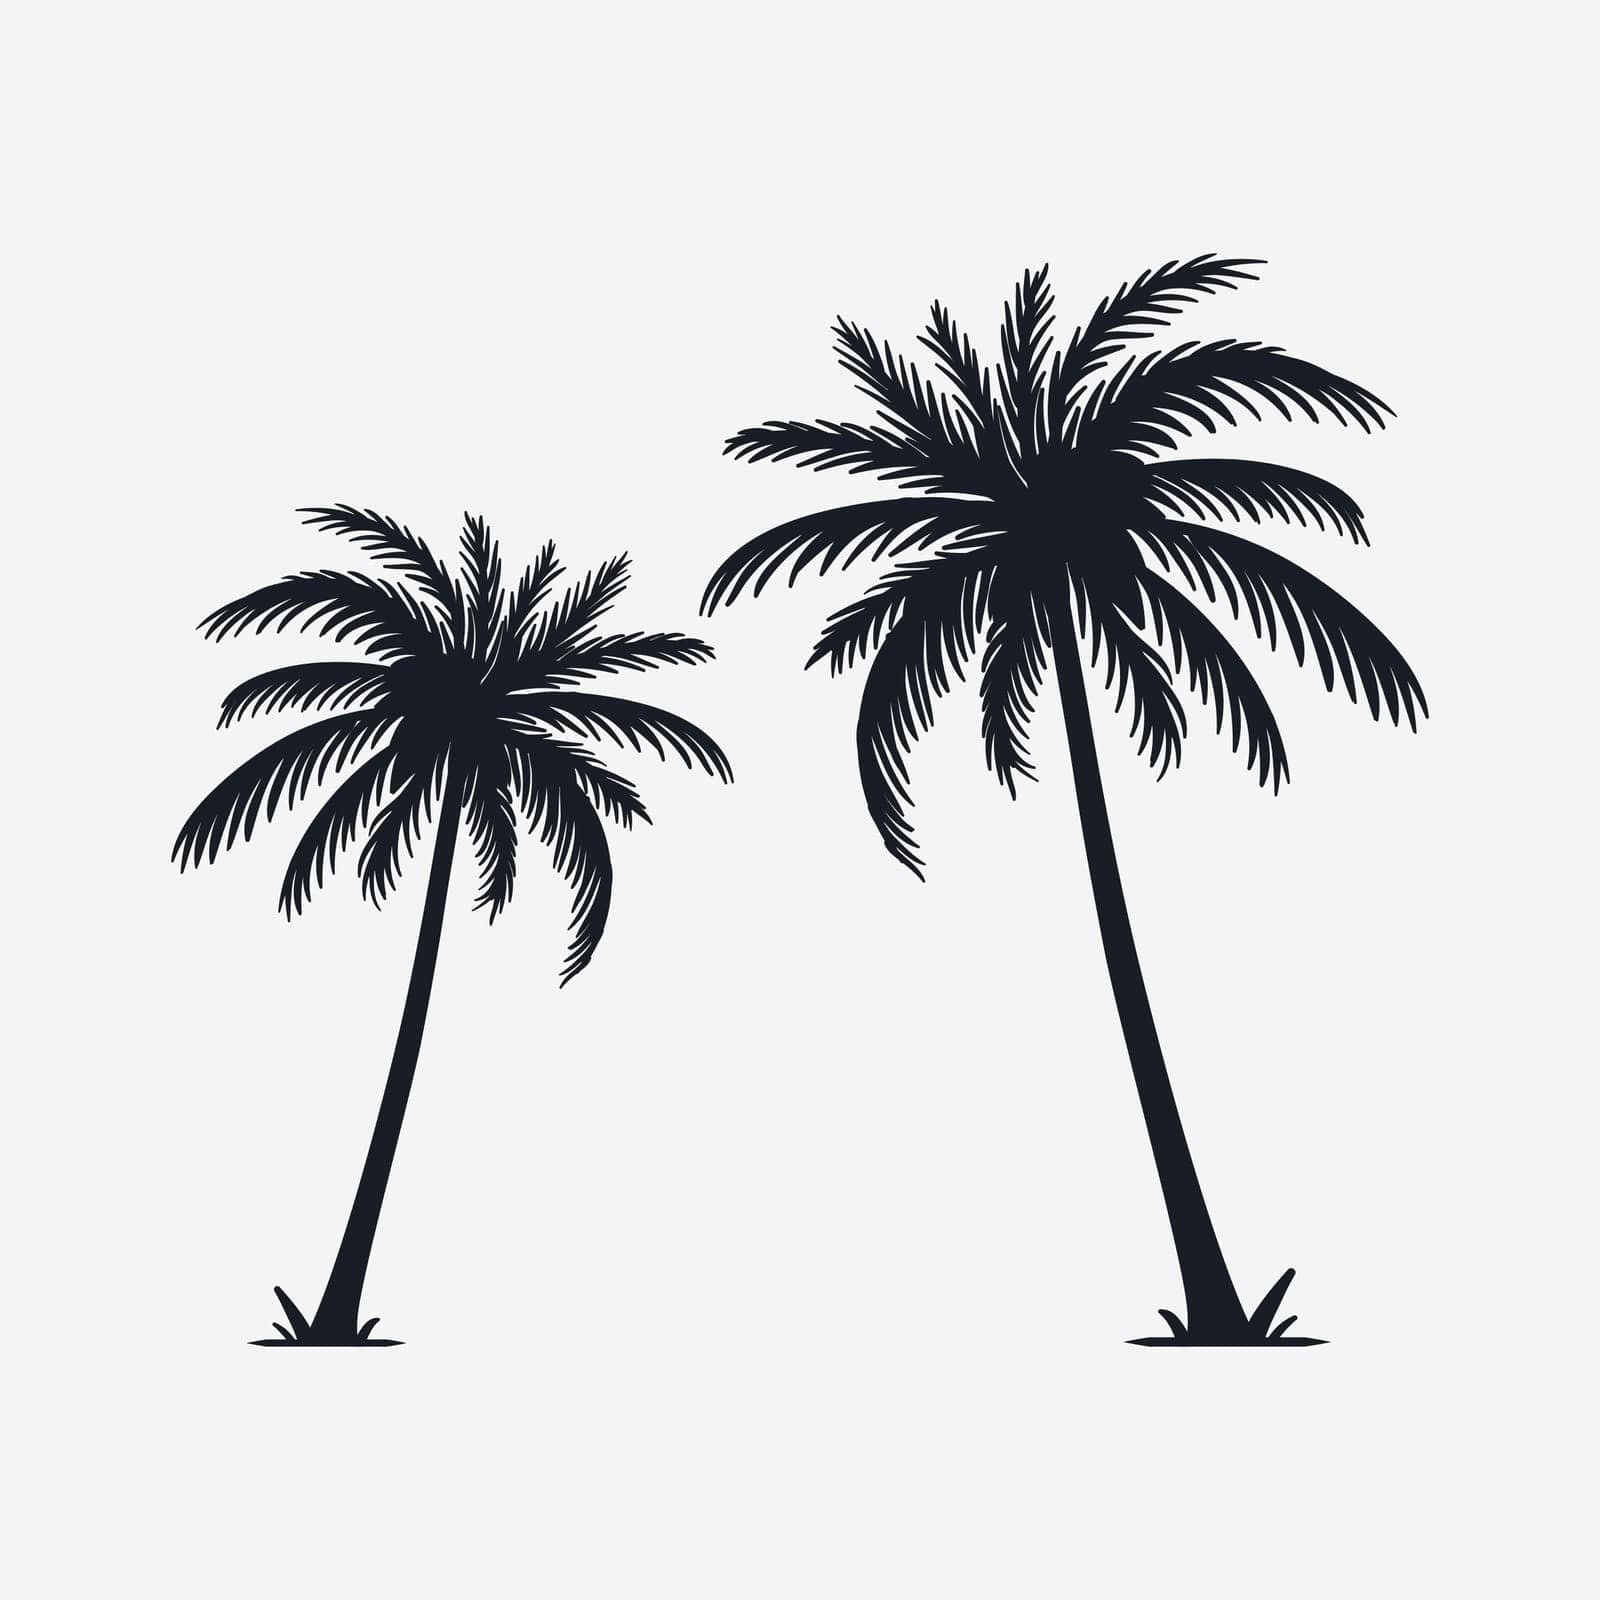 Palm trees silhouette. by Menyoen